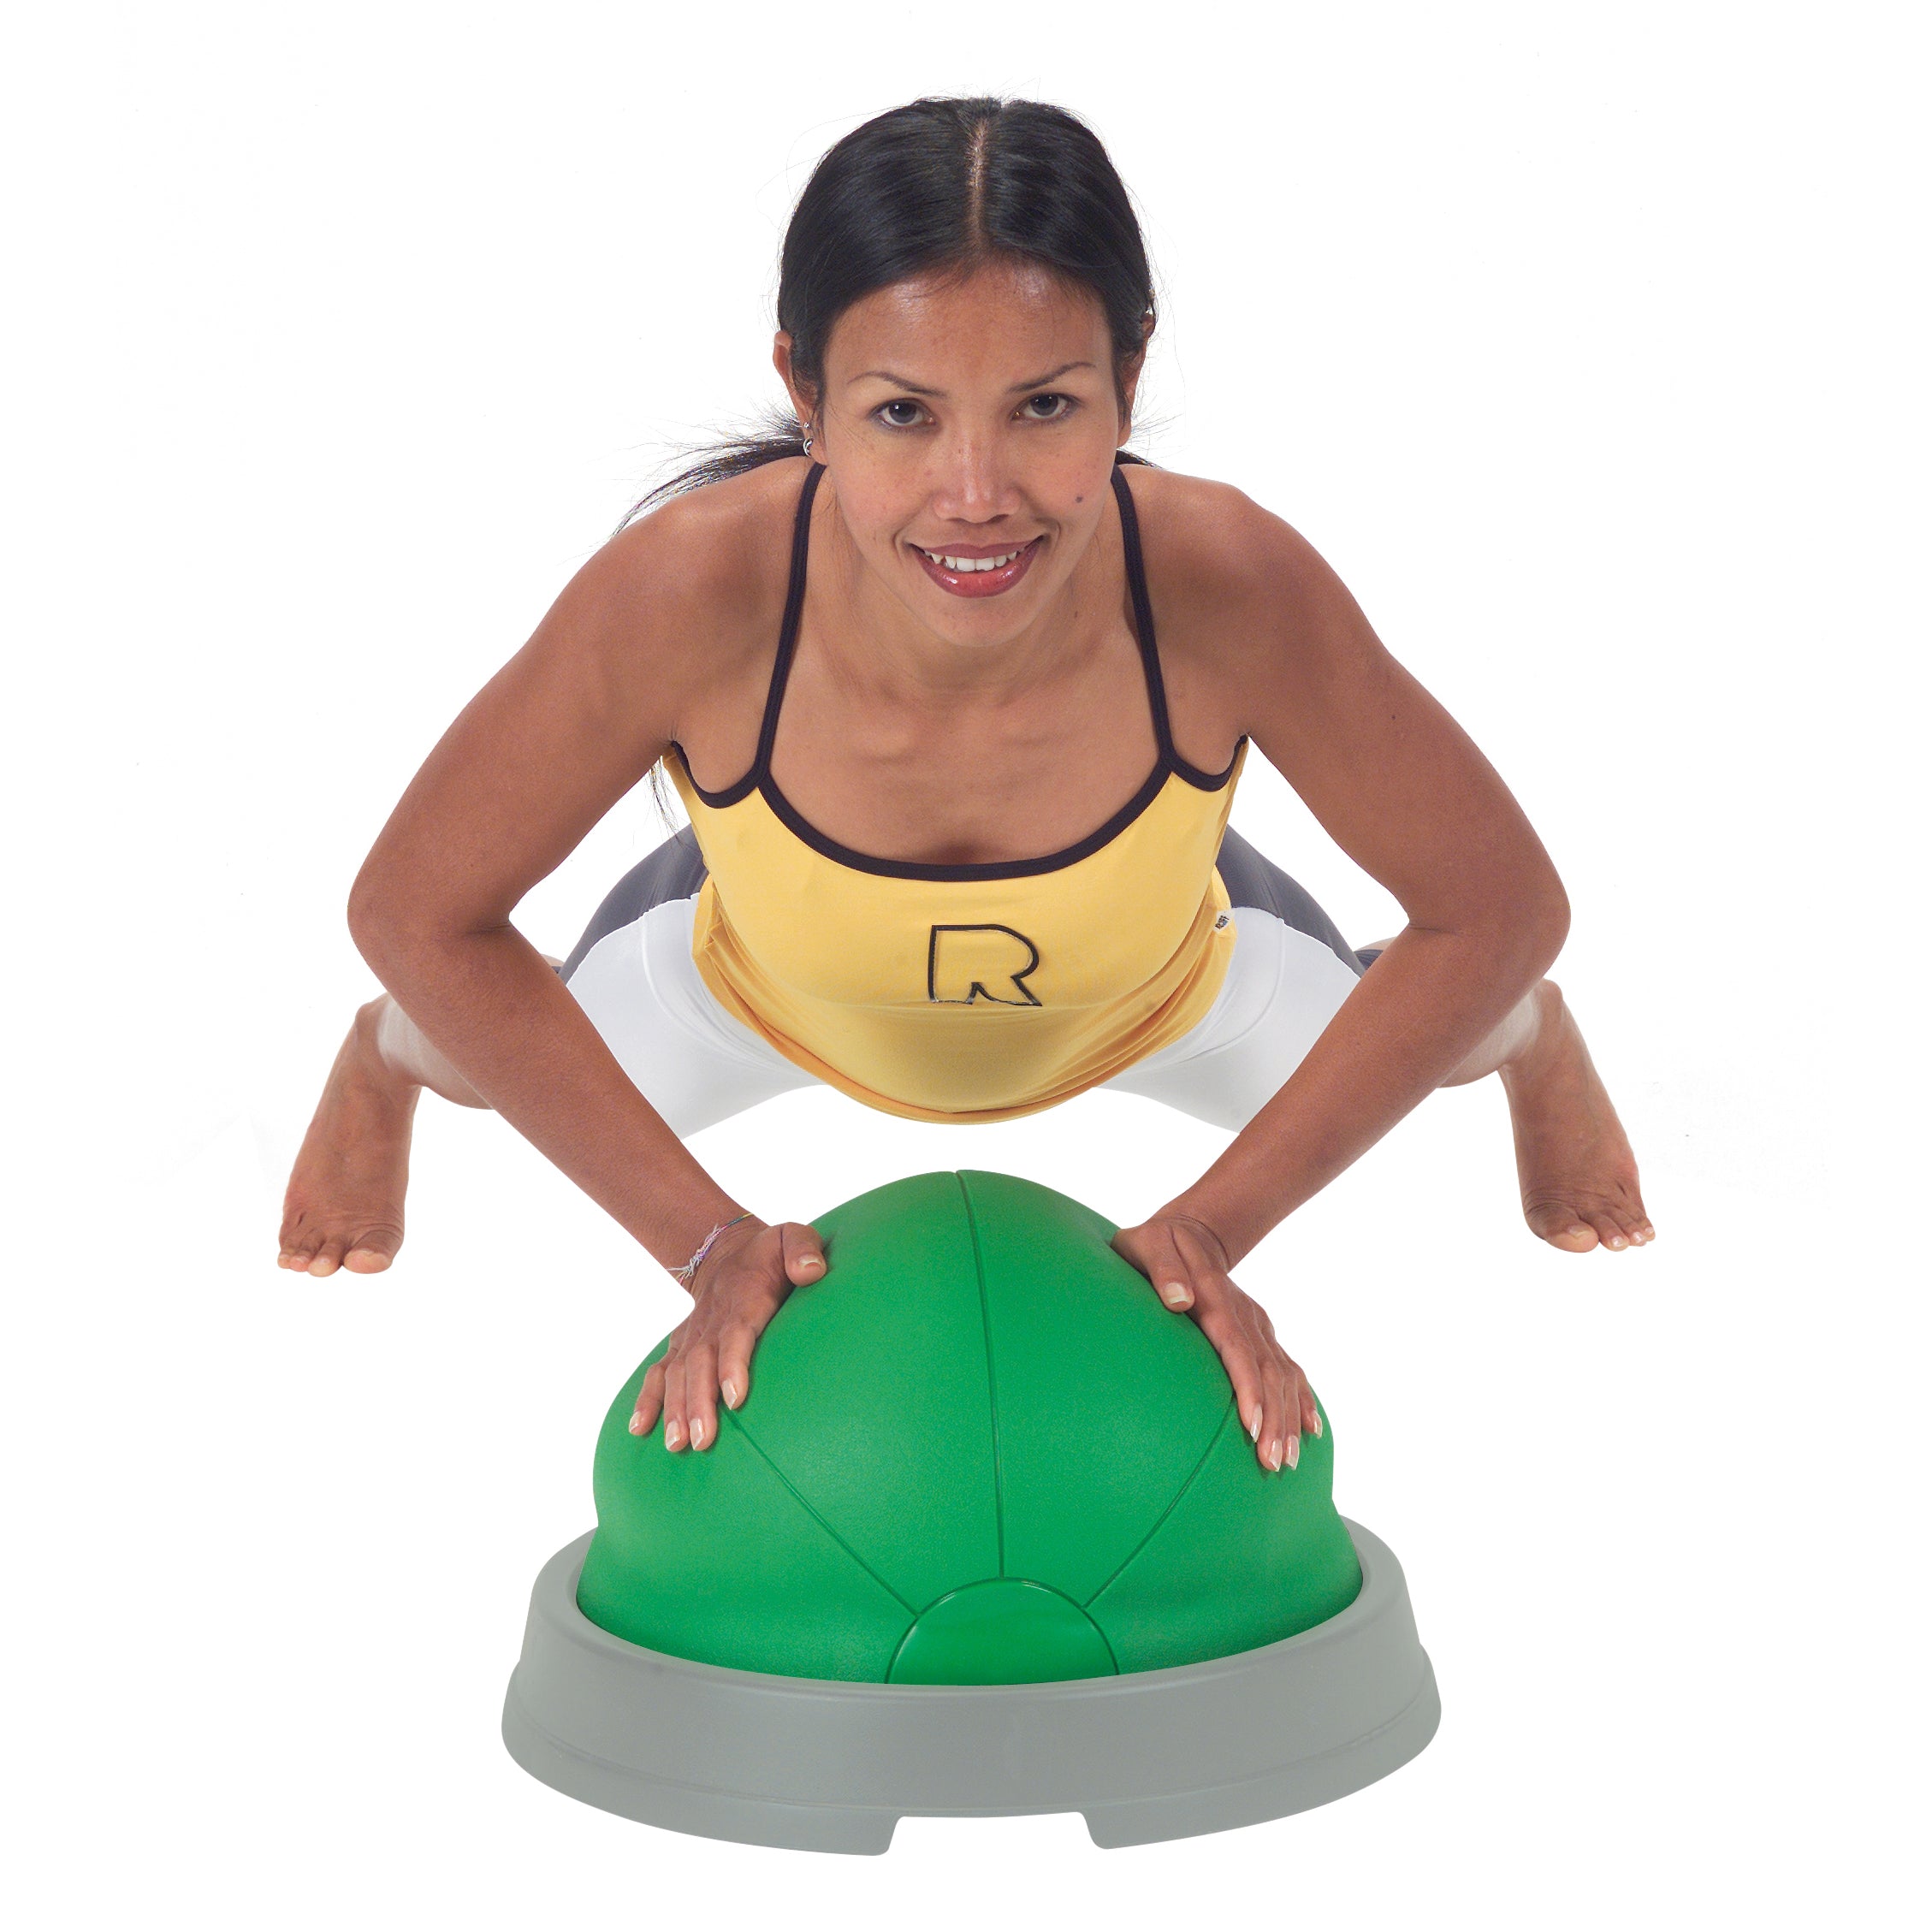 The Core Balance is a multi-functional tool, which is suitable for different kinds of training: from fitness to post-injury knee and ankle rehab. It is a soft green inflatable half ball with a hard base. You can inflate the product to the needed stability level. Useful aid to improve balance and coordination, it is also recommendable for stretching, flexibility and stabilization exercises.